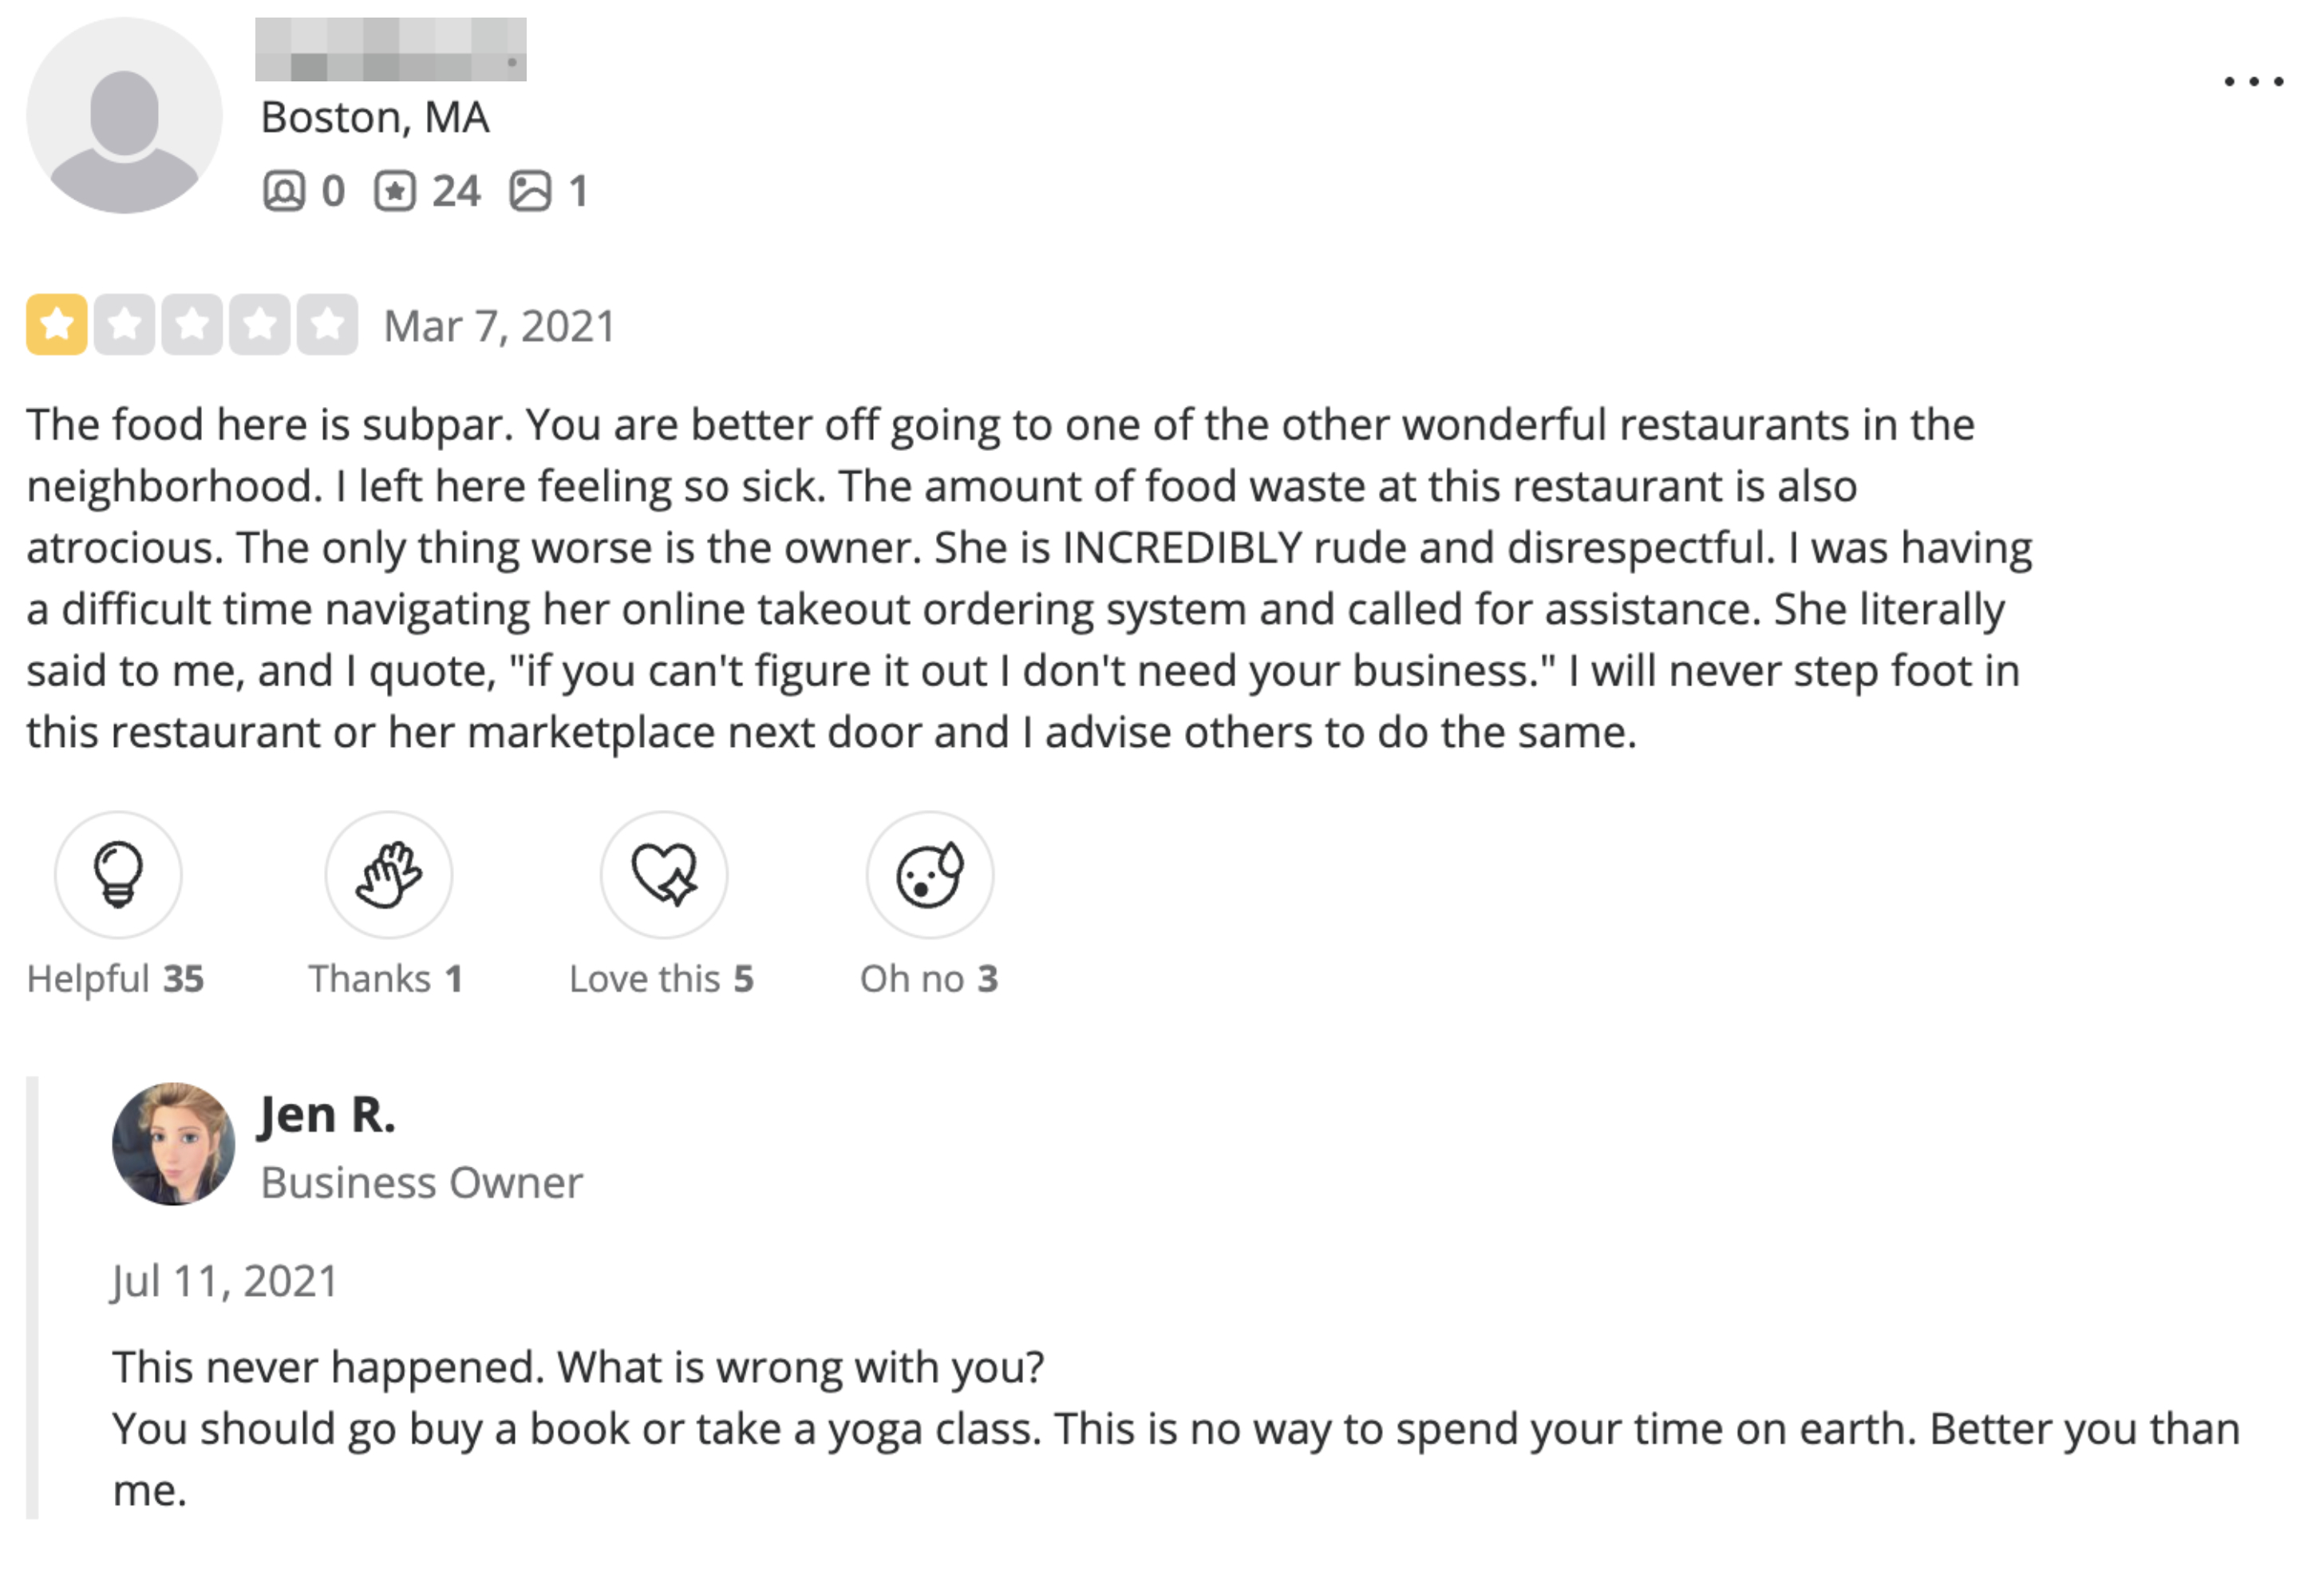 1-star review saying the food is &quot;subpar&quot; and the &quot;food waste&quot; is &quot;atrocious,&quot; and &quot;the only thing worse is the owner,&quot; who is &quot;incredibly rude and disrespectful,&quot; and Jen responding that it never happened